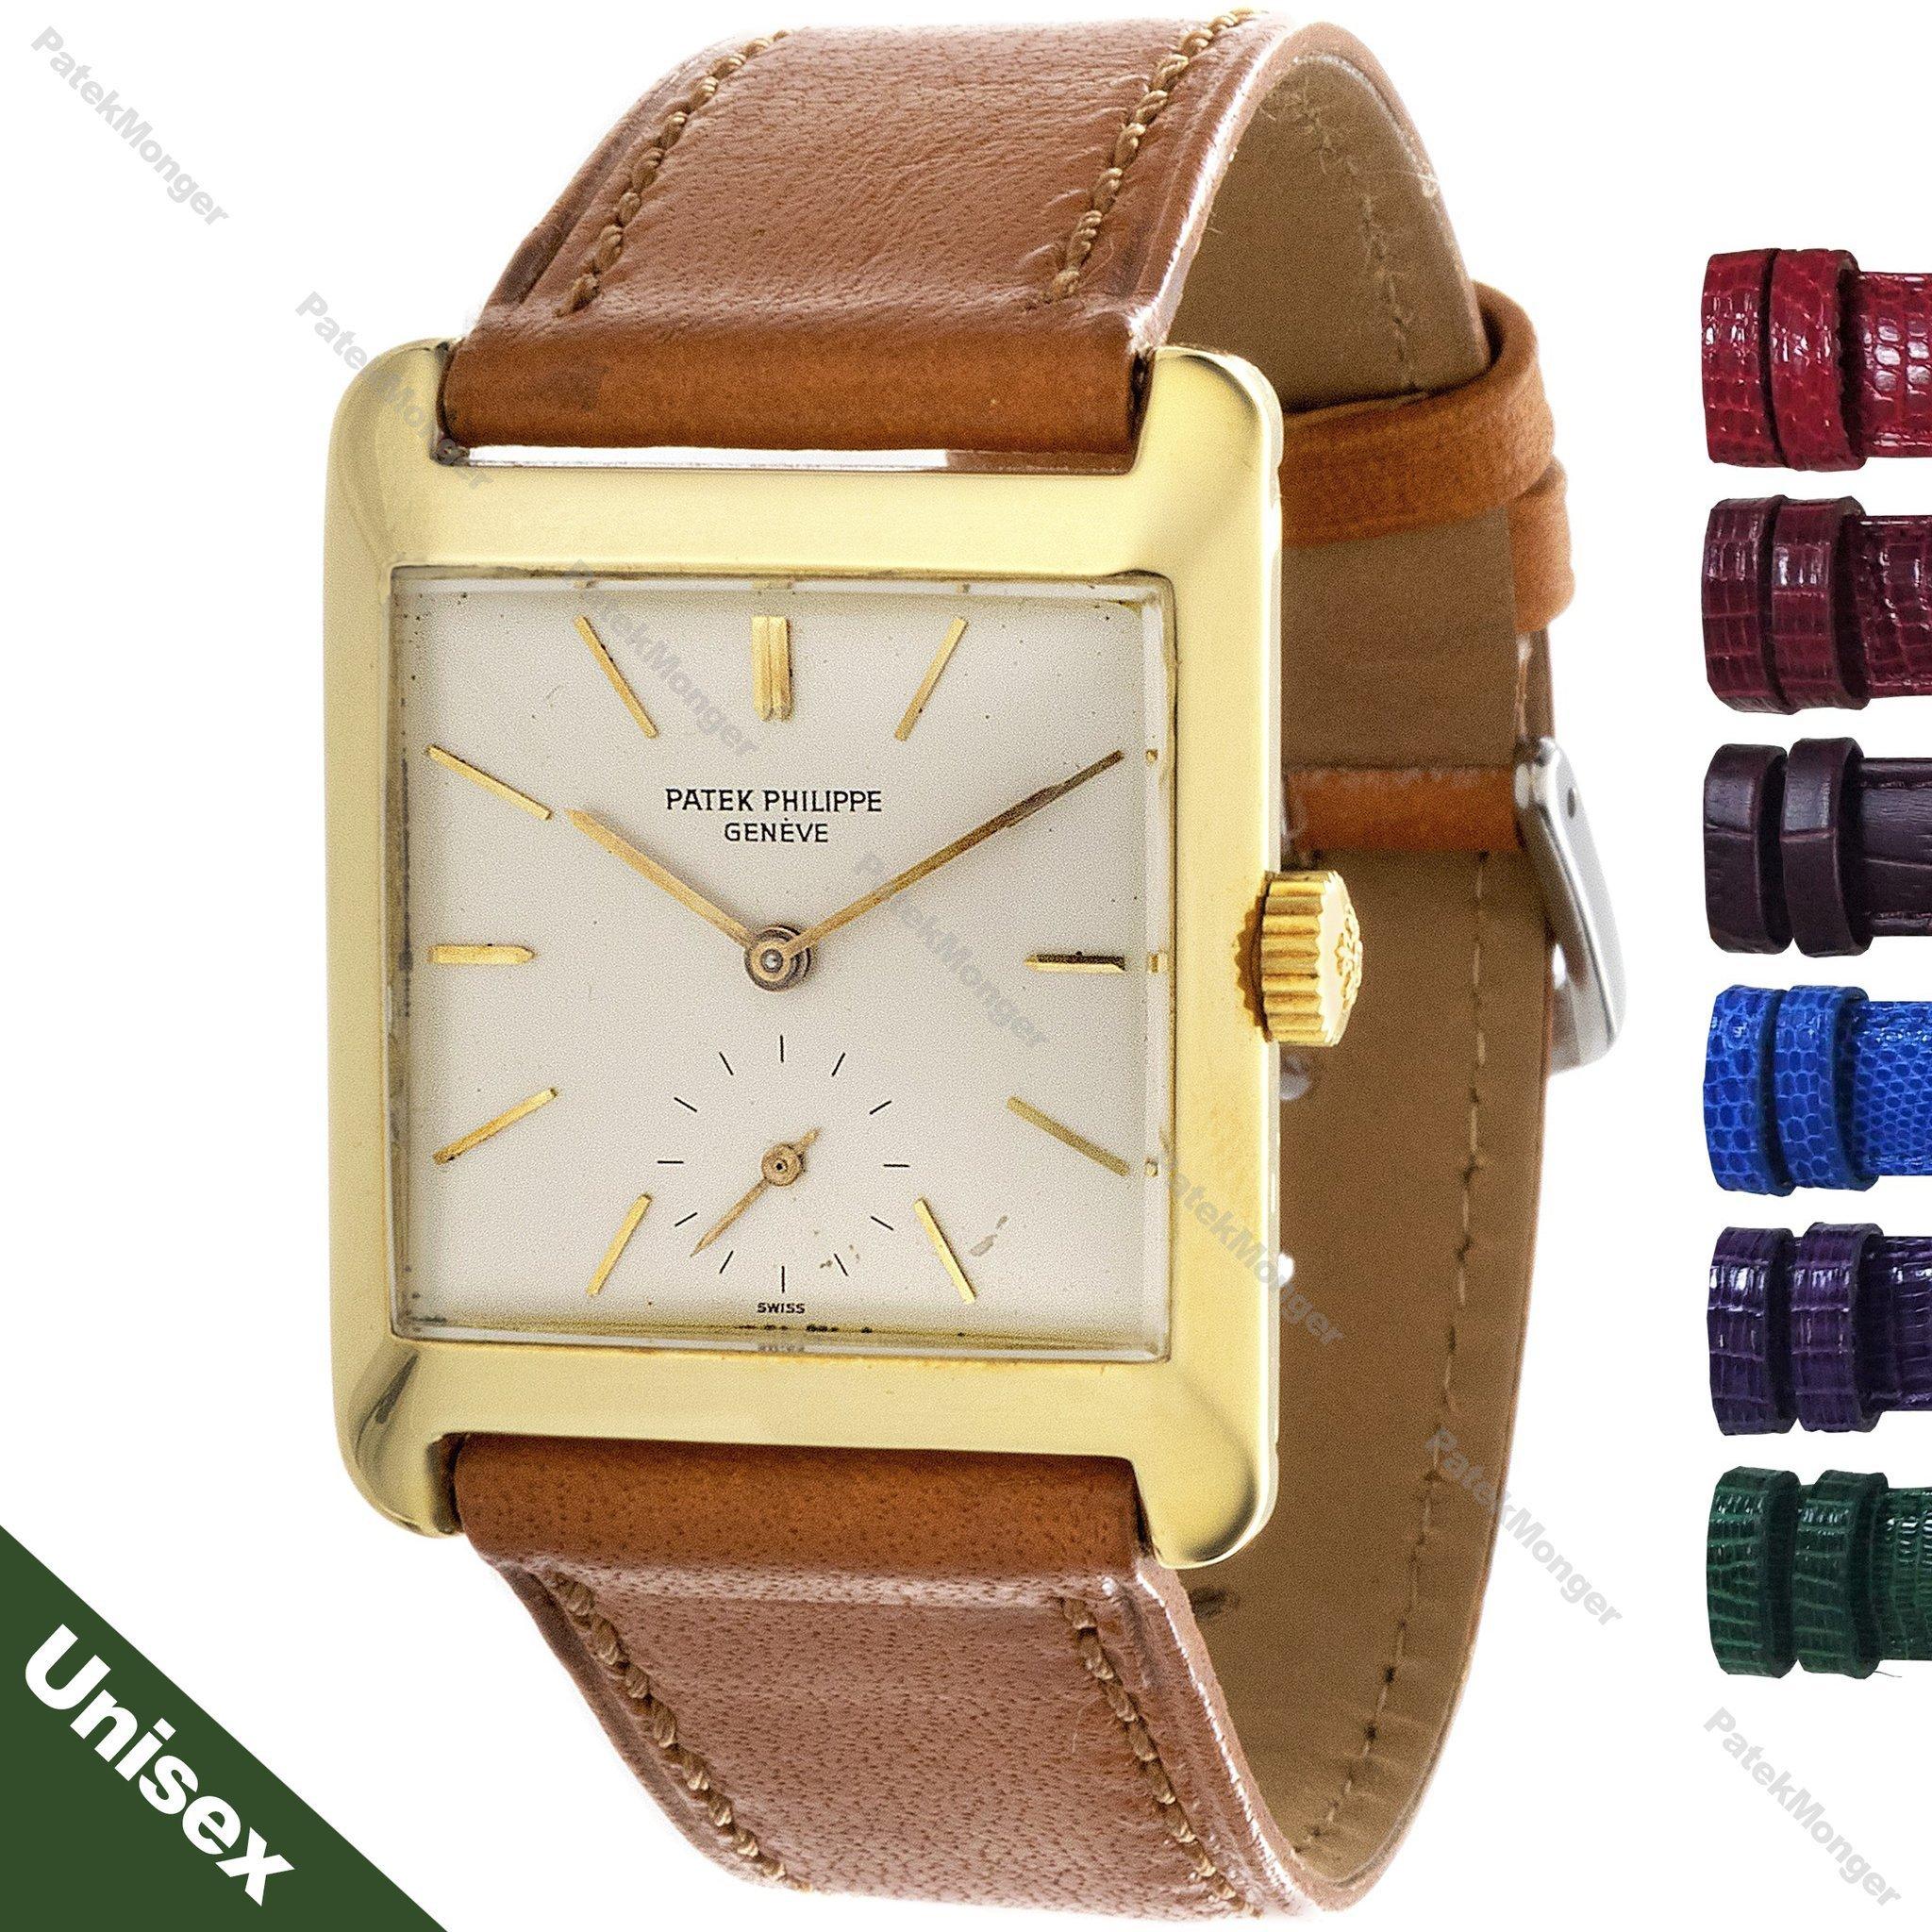 Introduction:
This 2488J vintage rectangular Patek Philippe watch features sub-seconds dial, and a choice of watch straps.  In today's fashions this size if perfect for a woman or a man.  Multiple strap options are available.

Date & Paperwork: 
The